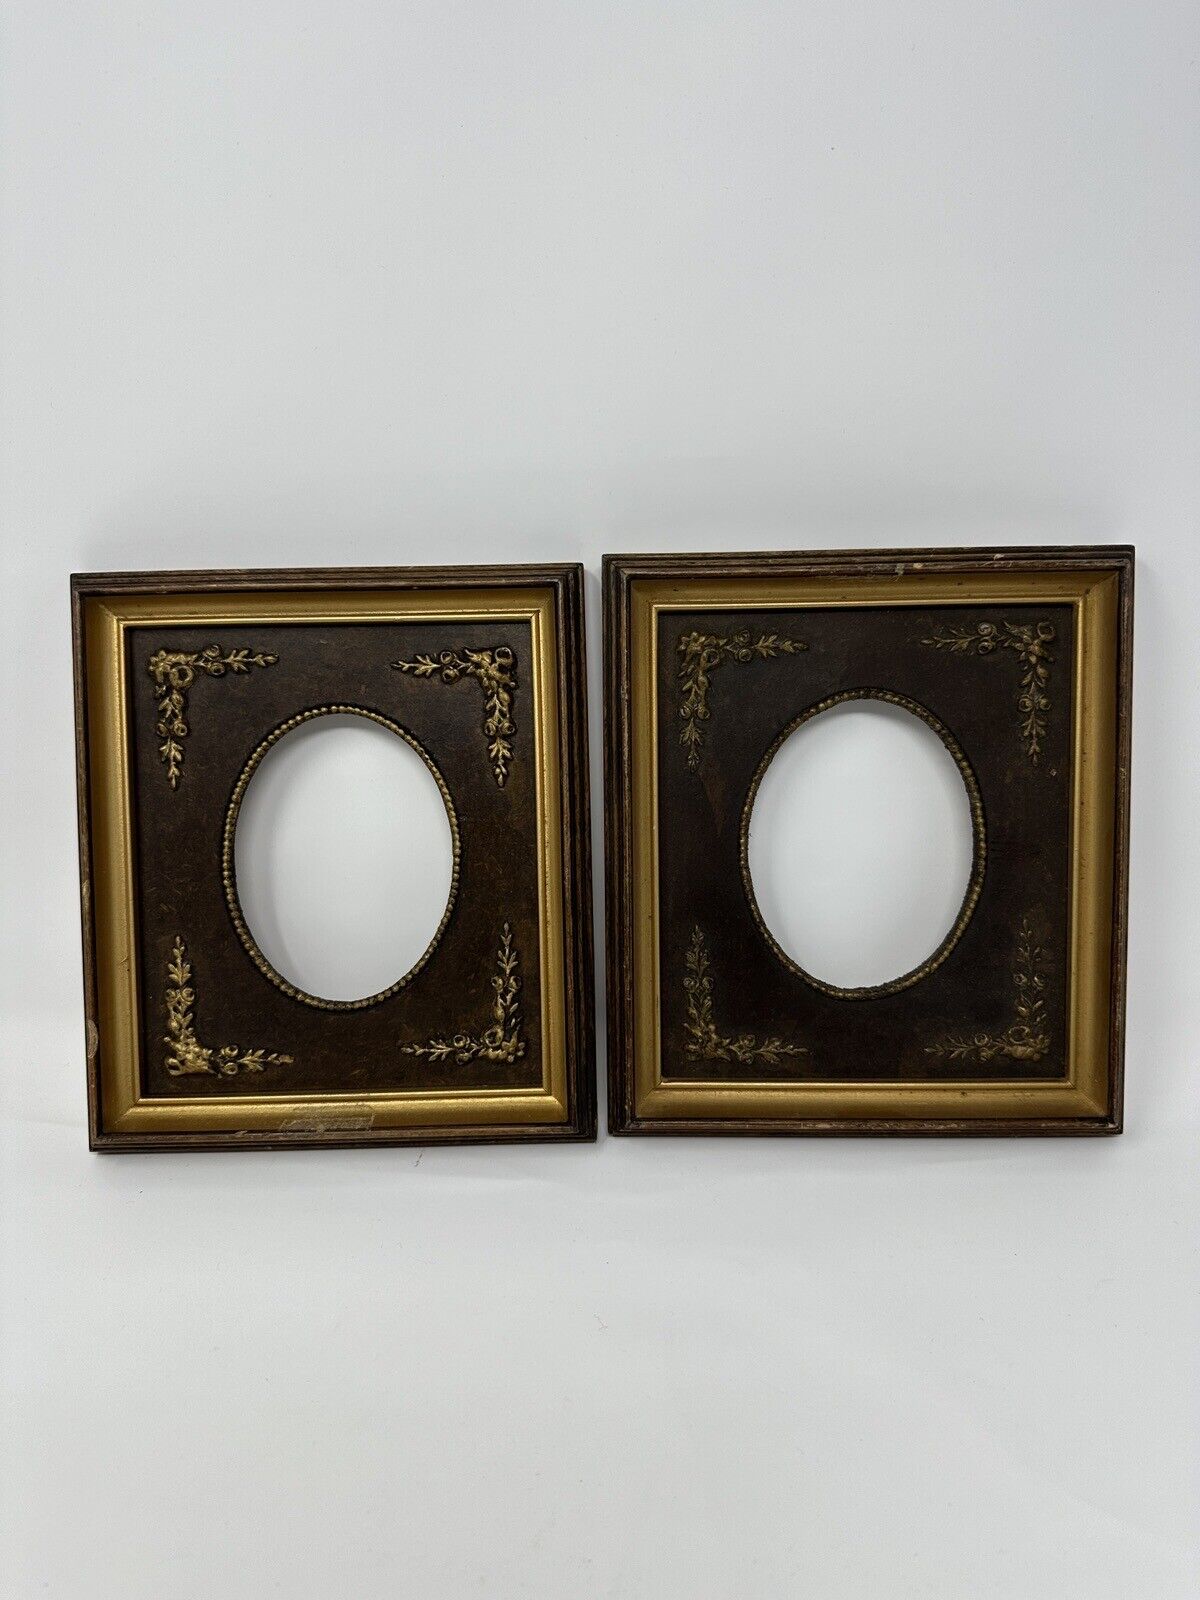 Lot Of 2 VTG Ornate Victorian Style Oval Picture Frames - Some Flaws See Pics